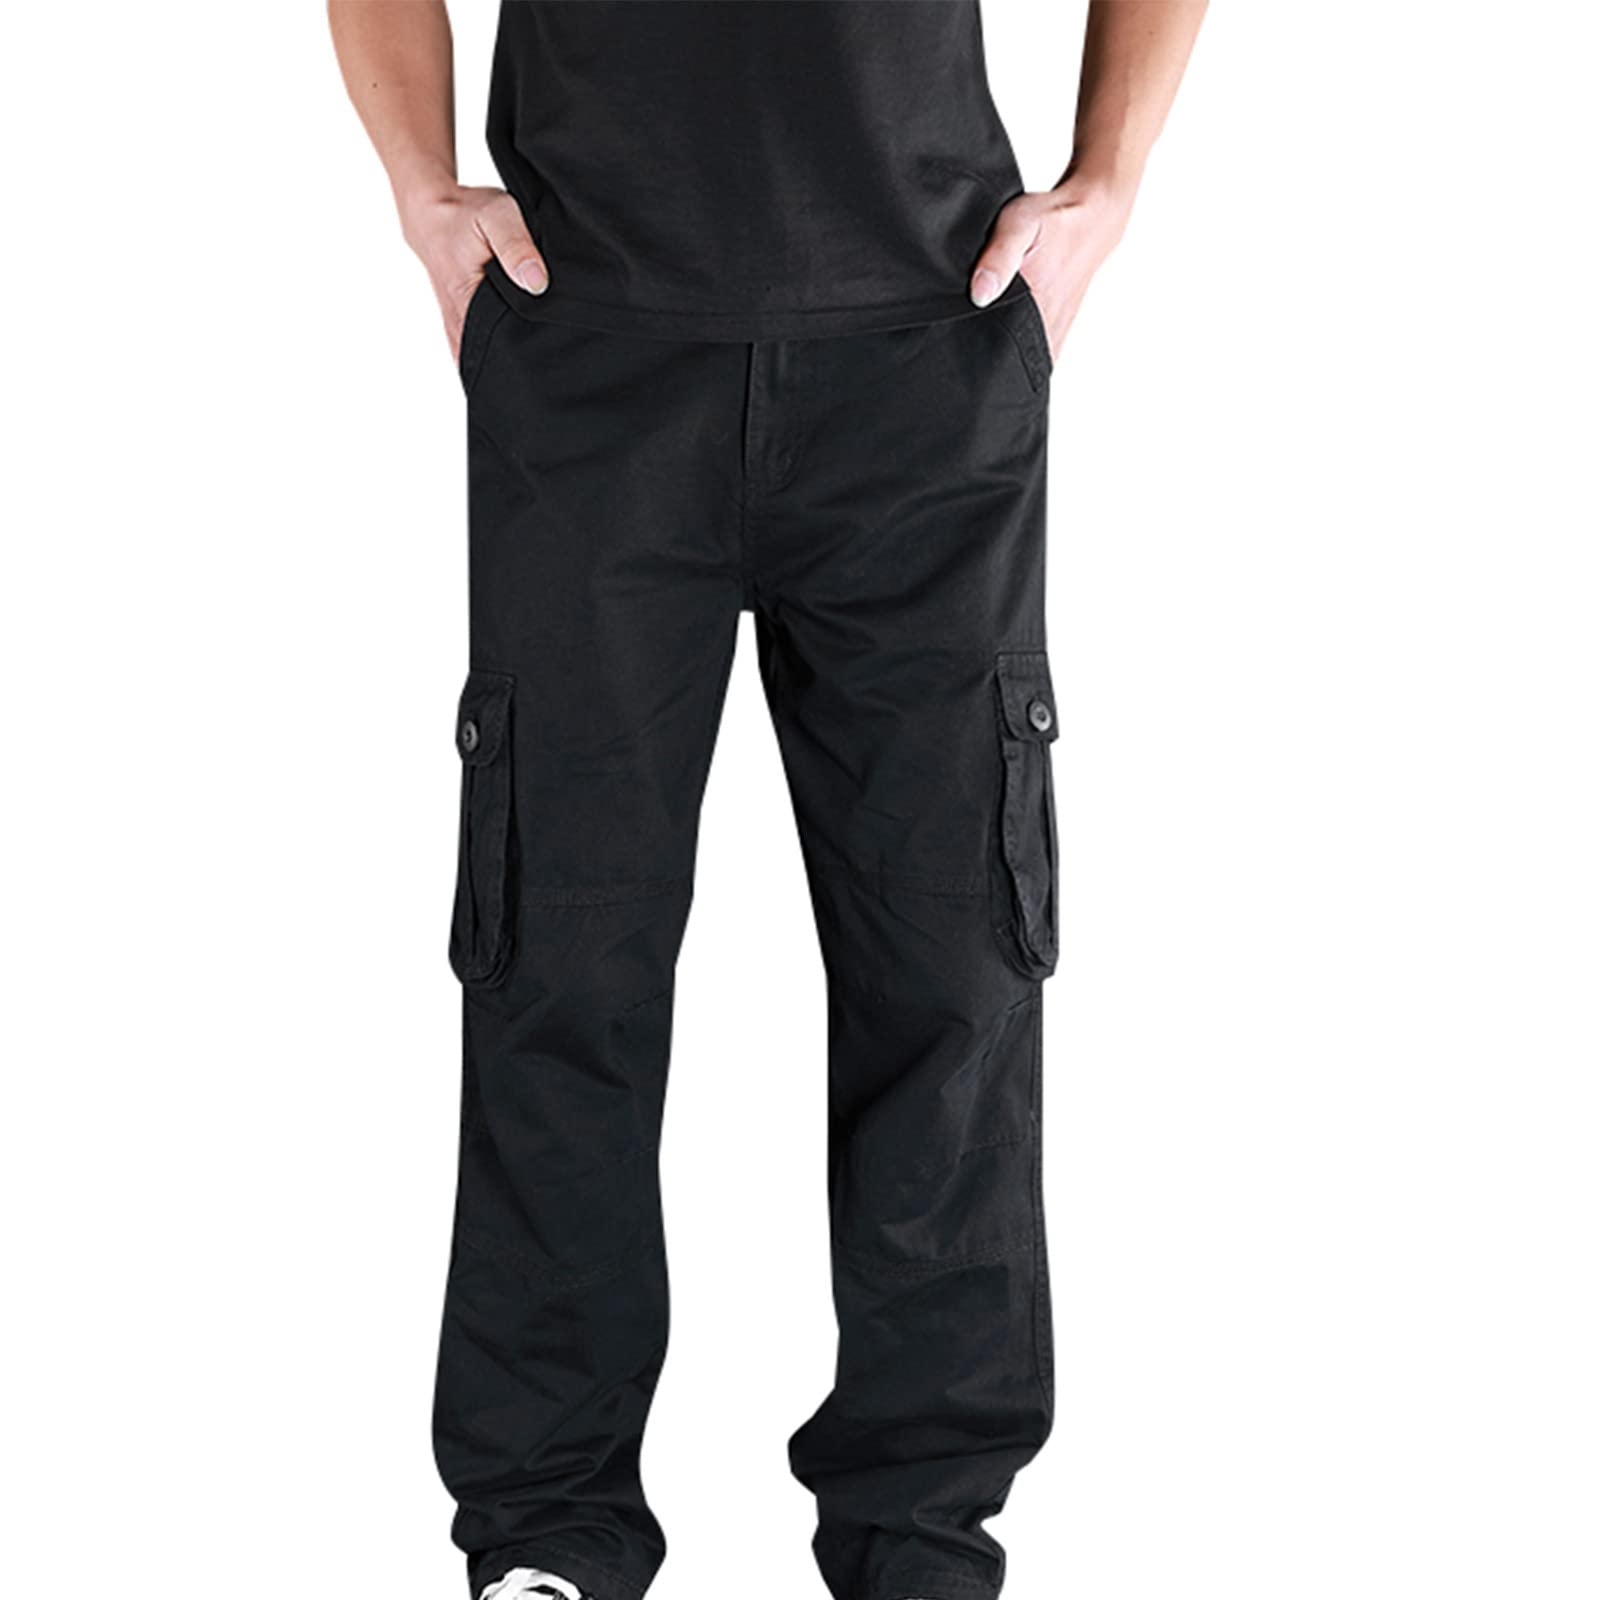 TRGPSG Men's Casual Relaxed Fit Cargo Pants, India | Ubuy